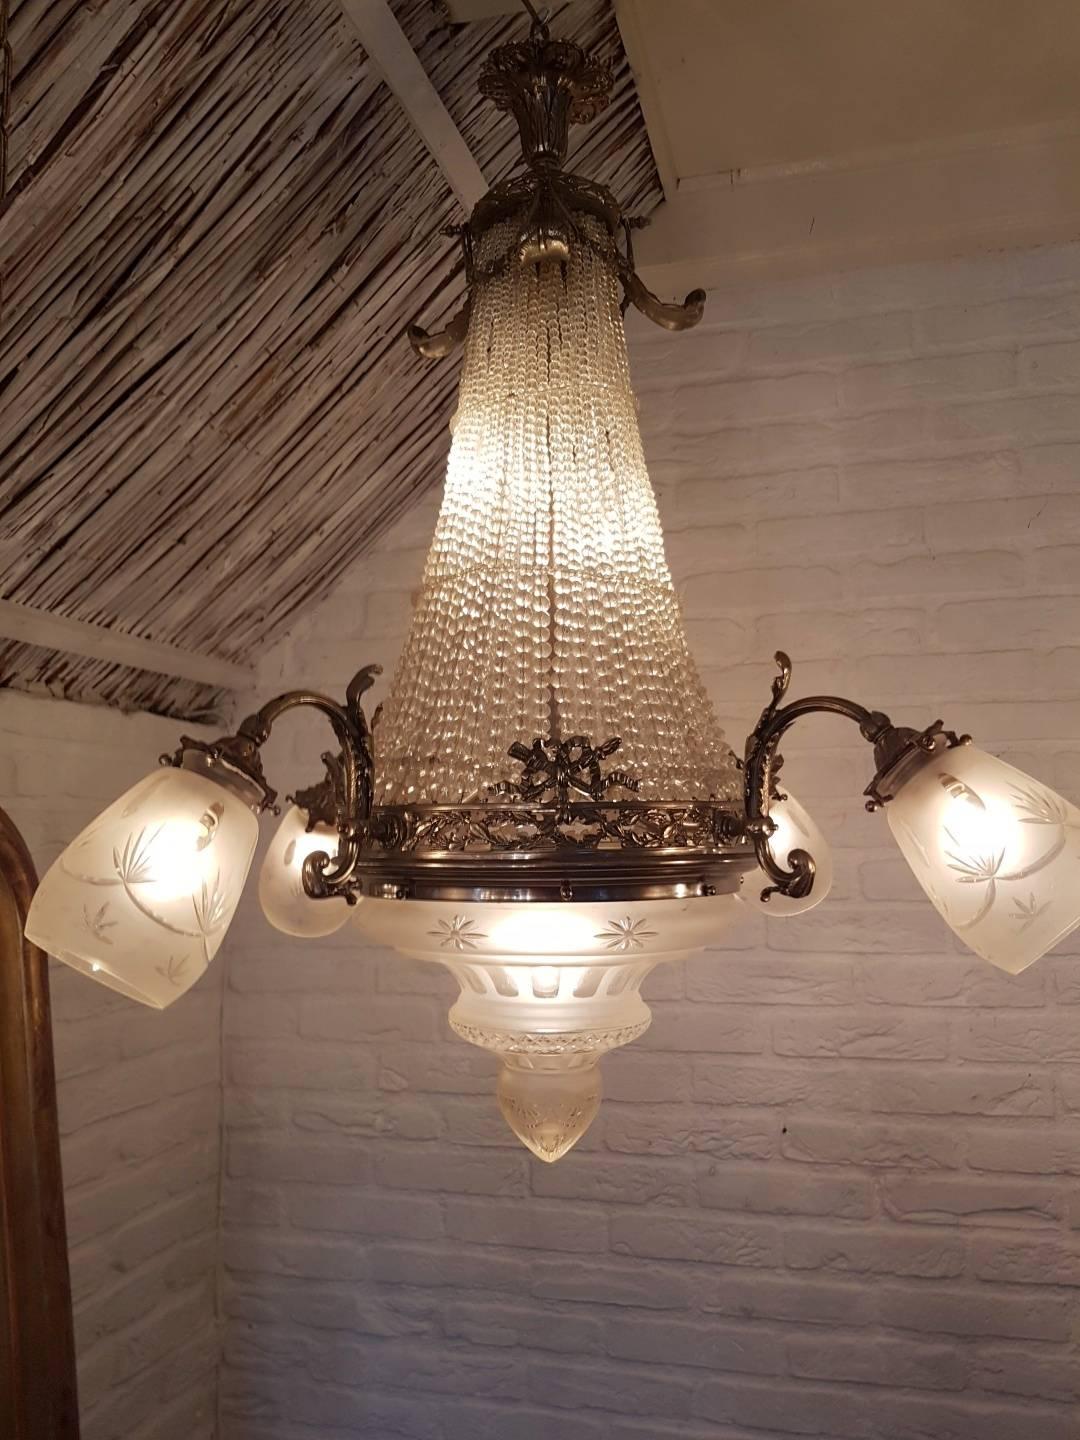 Antique sac de pearl chandelier. The top is made of a multitude of crystal beads and the bottom of the Chandelier is a large and beautiful coupe of Victorian cut frosted glass and four shades of Victorian cut frosted glass connected to the ring in